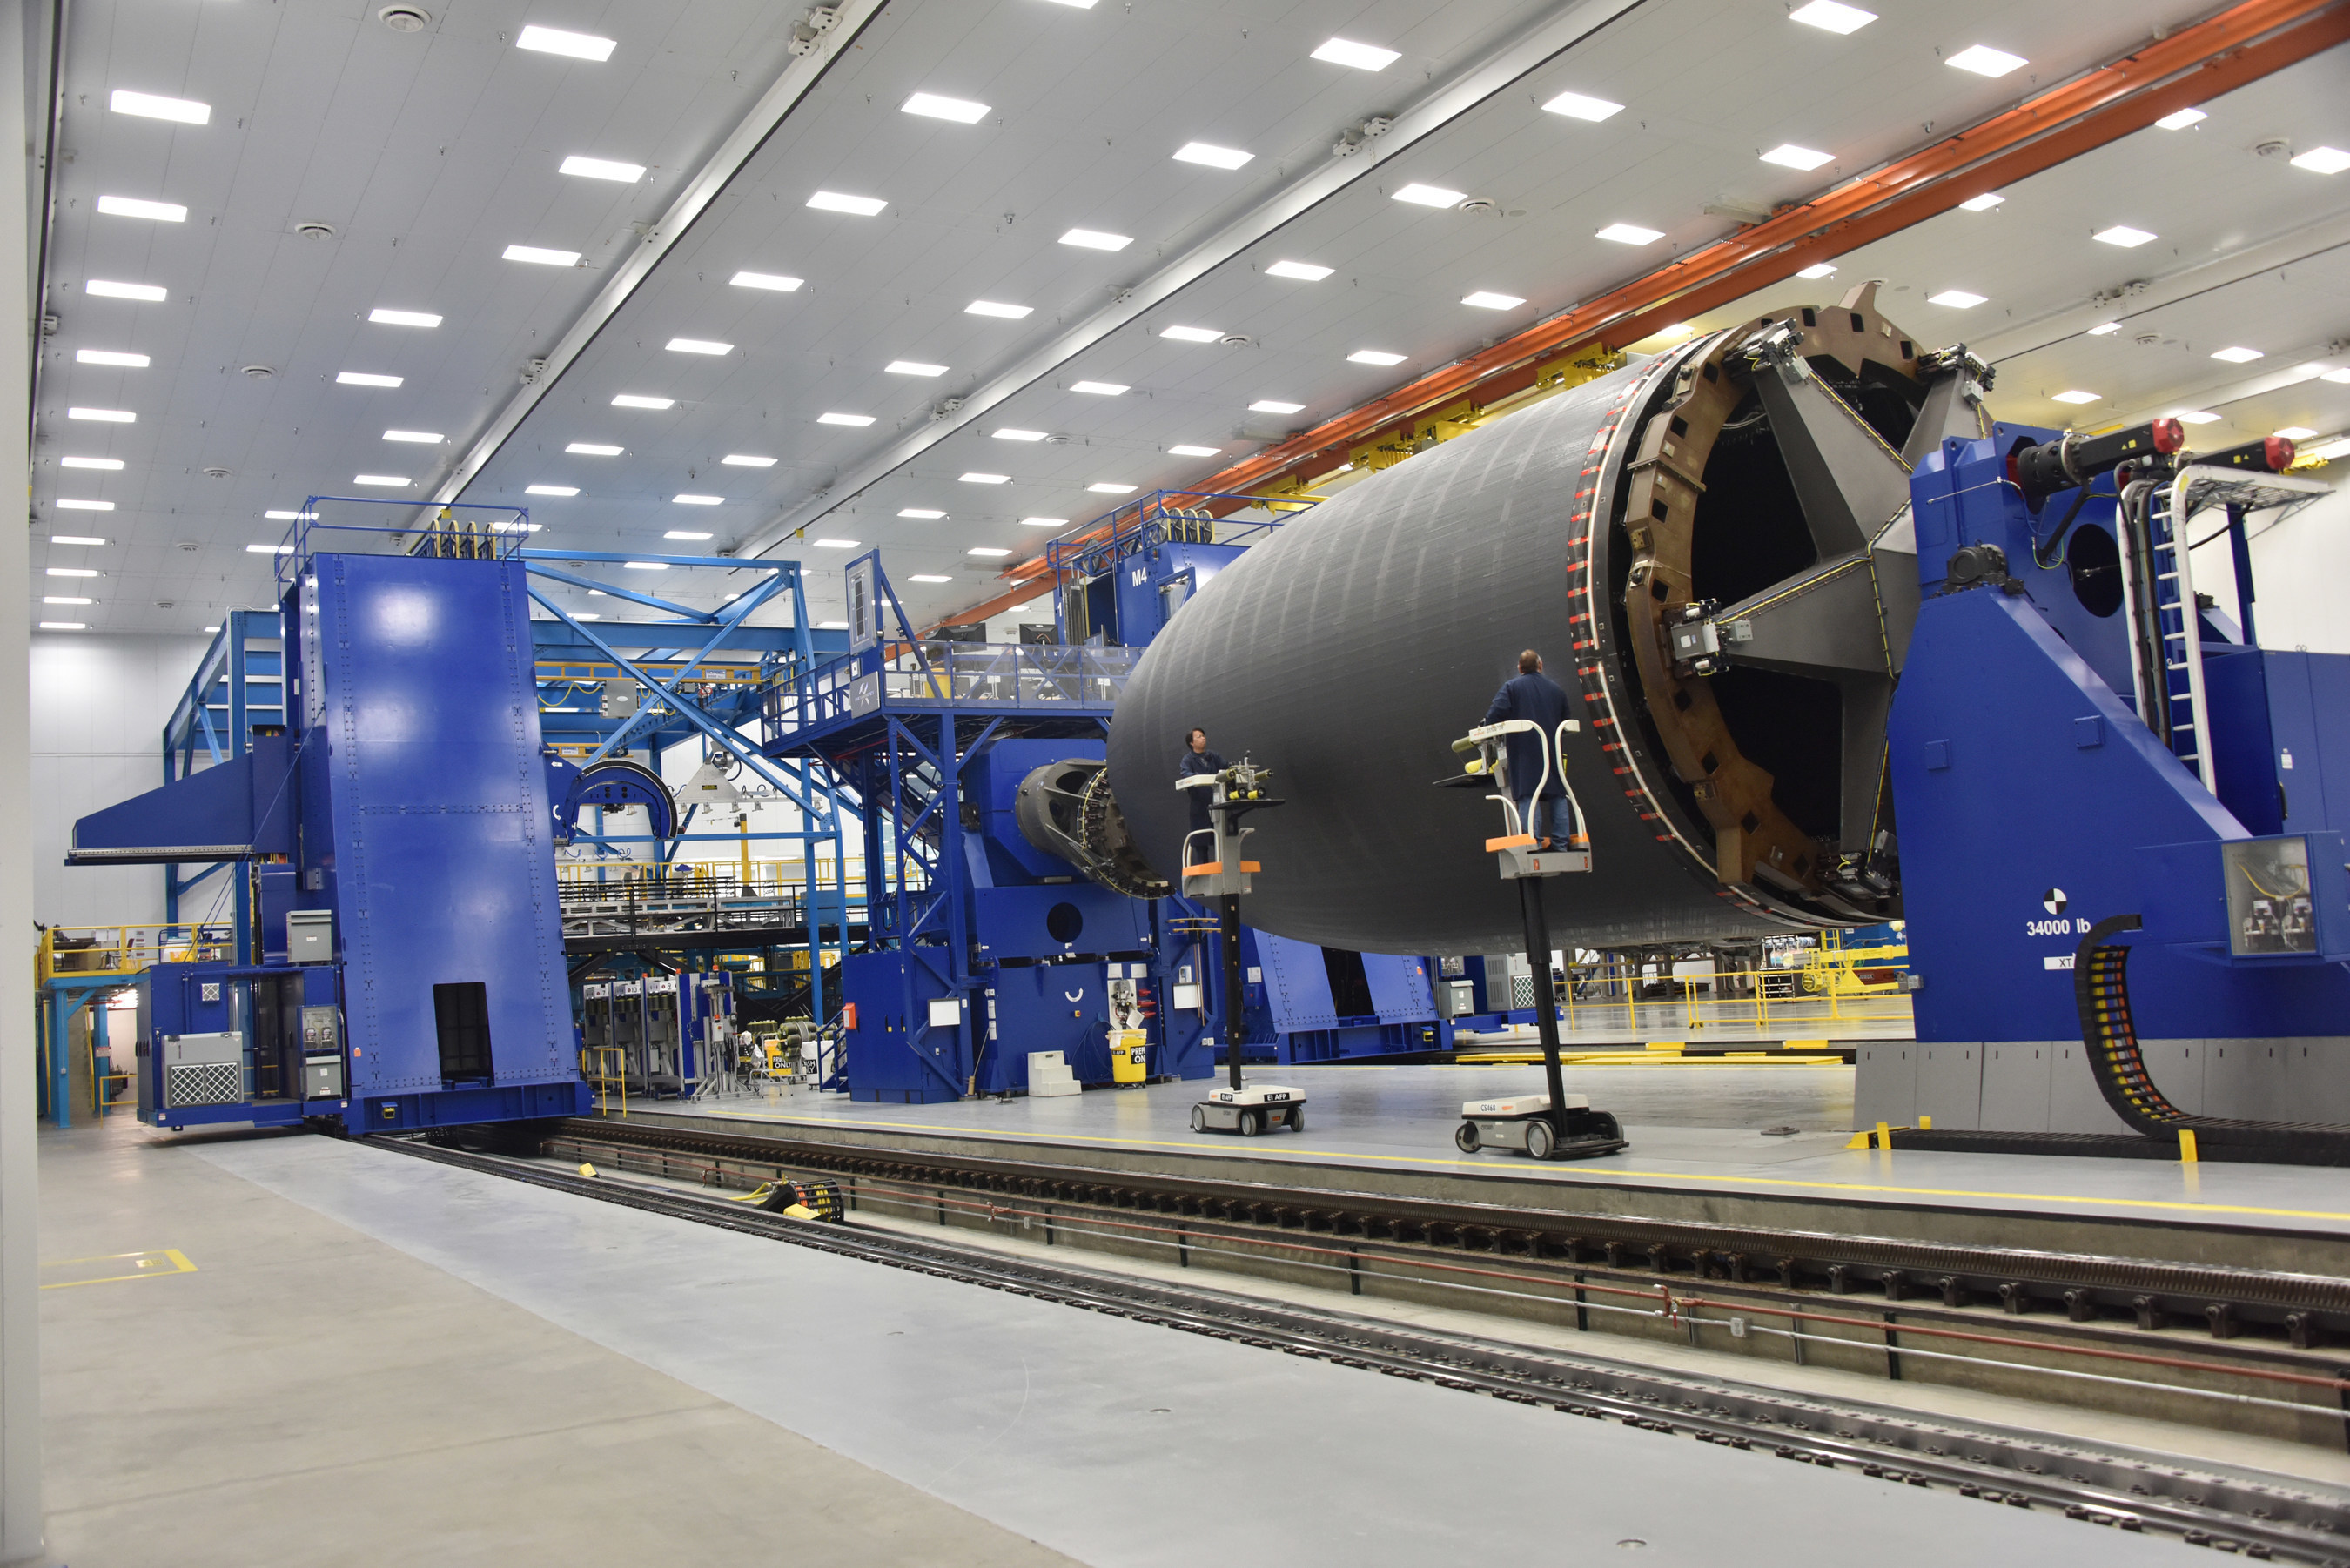 The autoclave addition is part of a 94,000 square-foot expansion to Spirit's Composite Fuselage Facility, where the company makes the carbon-fiber nose section for Boeing's 787 Dreamliner.